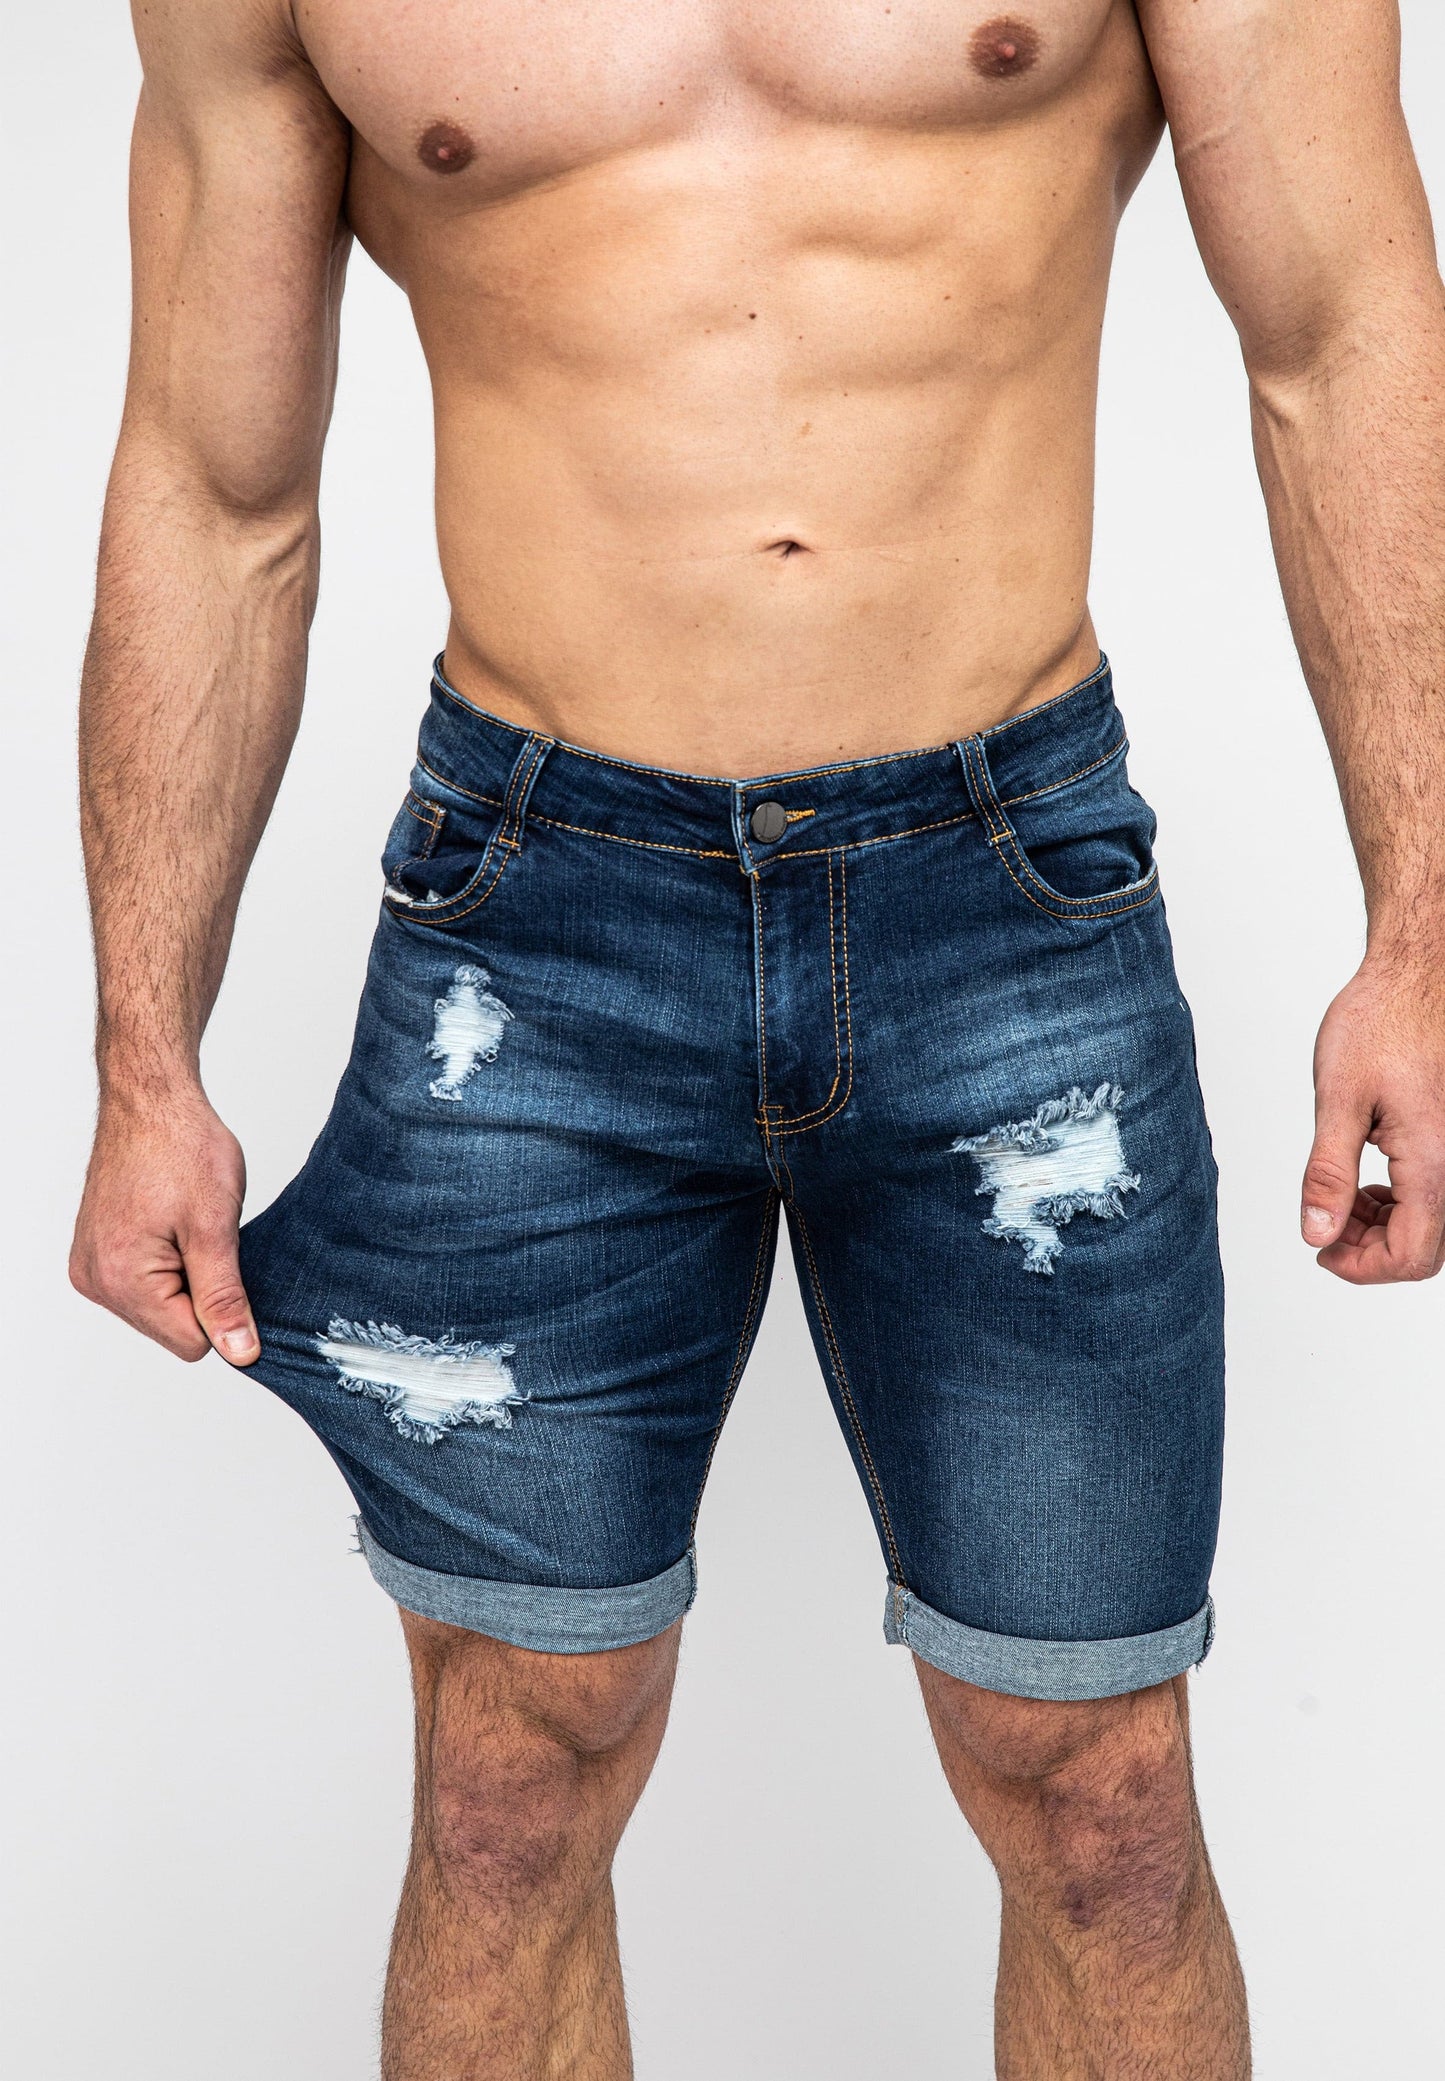 Blue Ripped Skinny Men's Jeans Shorts Front Stretch Denim